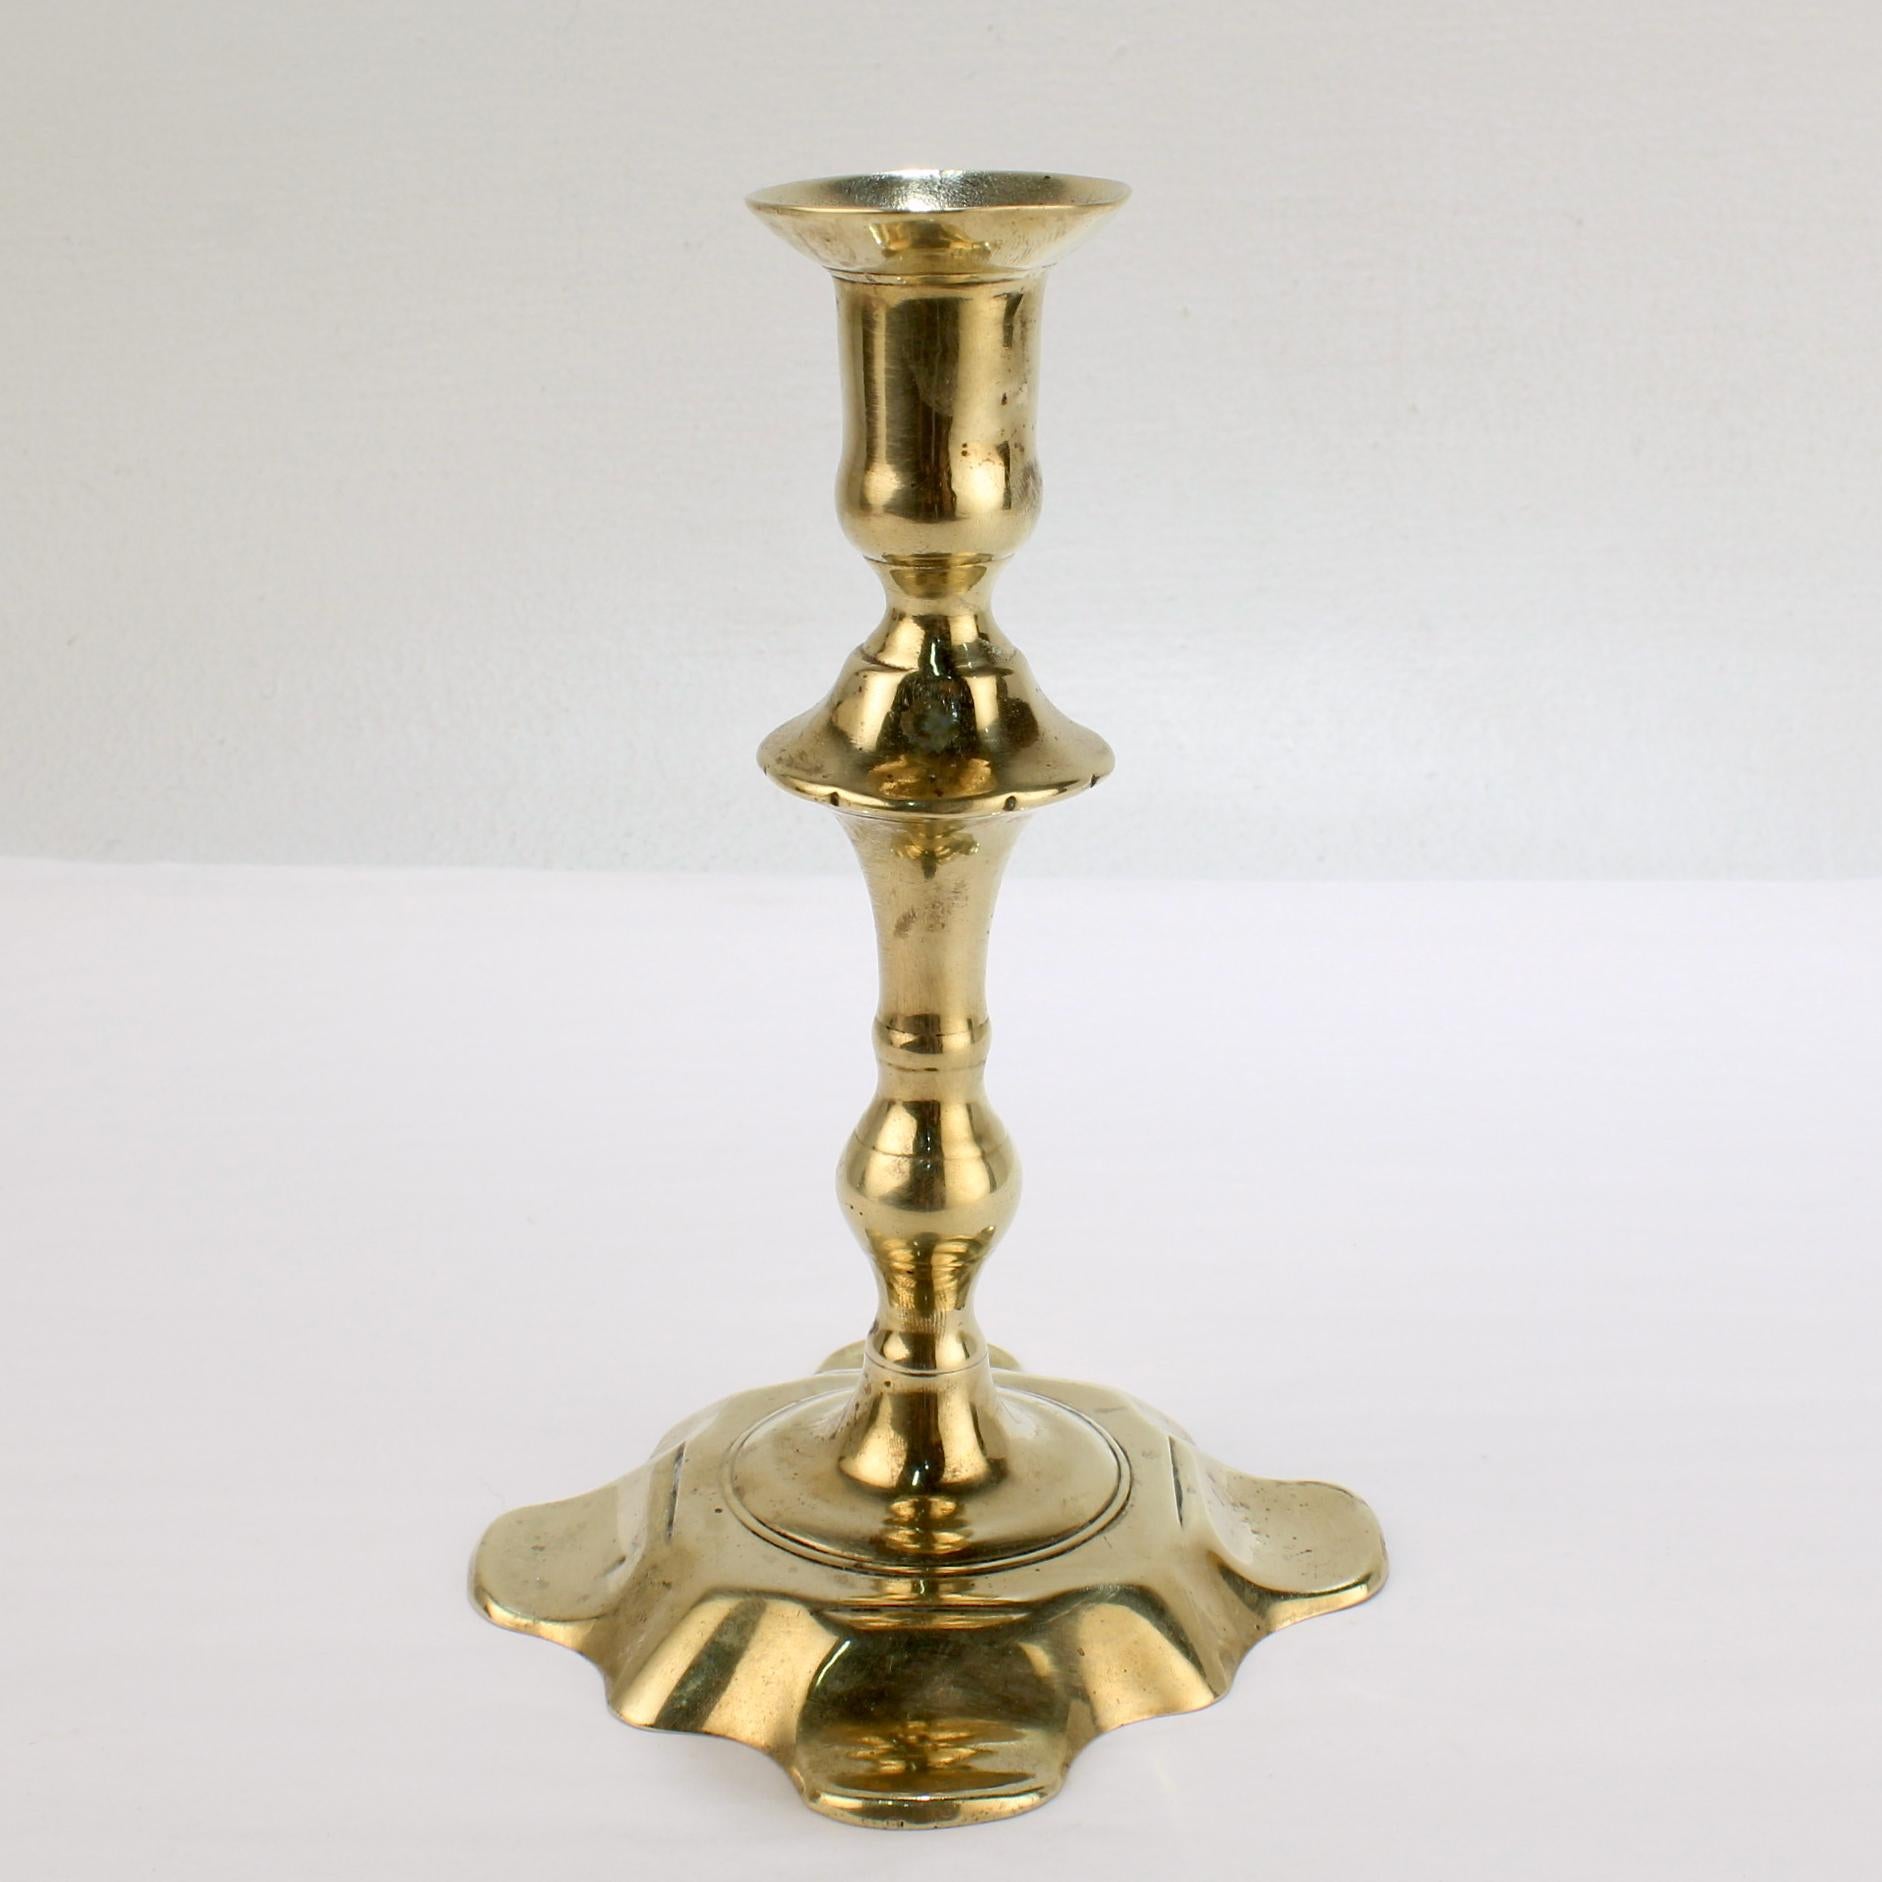 A fine antique English candlestick.

With a 8 lobed petal base, turned shaft, and integral bobeche. 

Simply a fine period candlestick!

Date:
Mid-18th century

Overall condition:
It is in overall good, as-pictured, used estate condition.